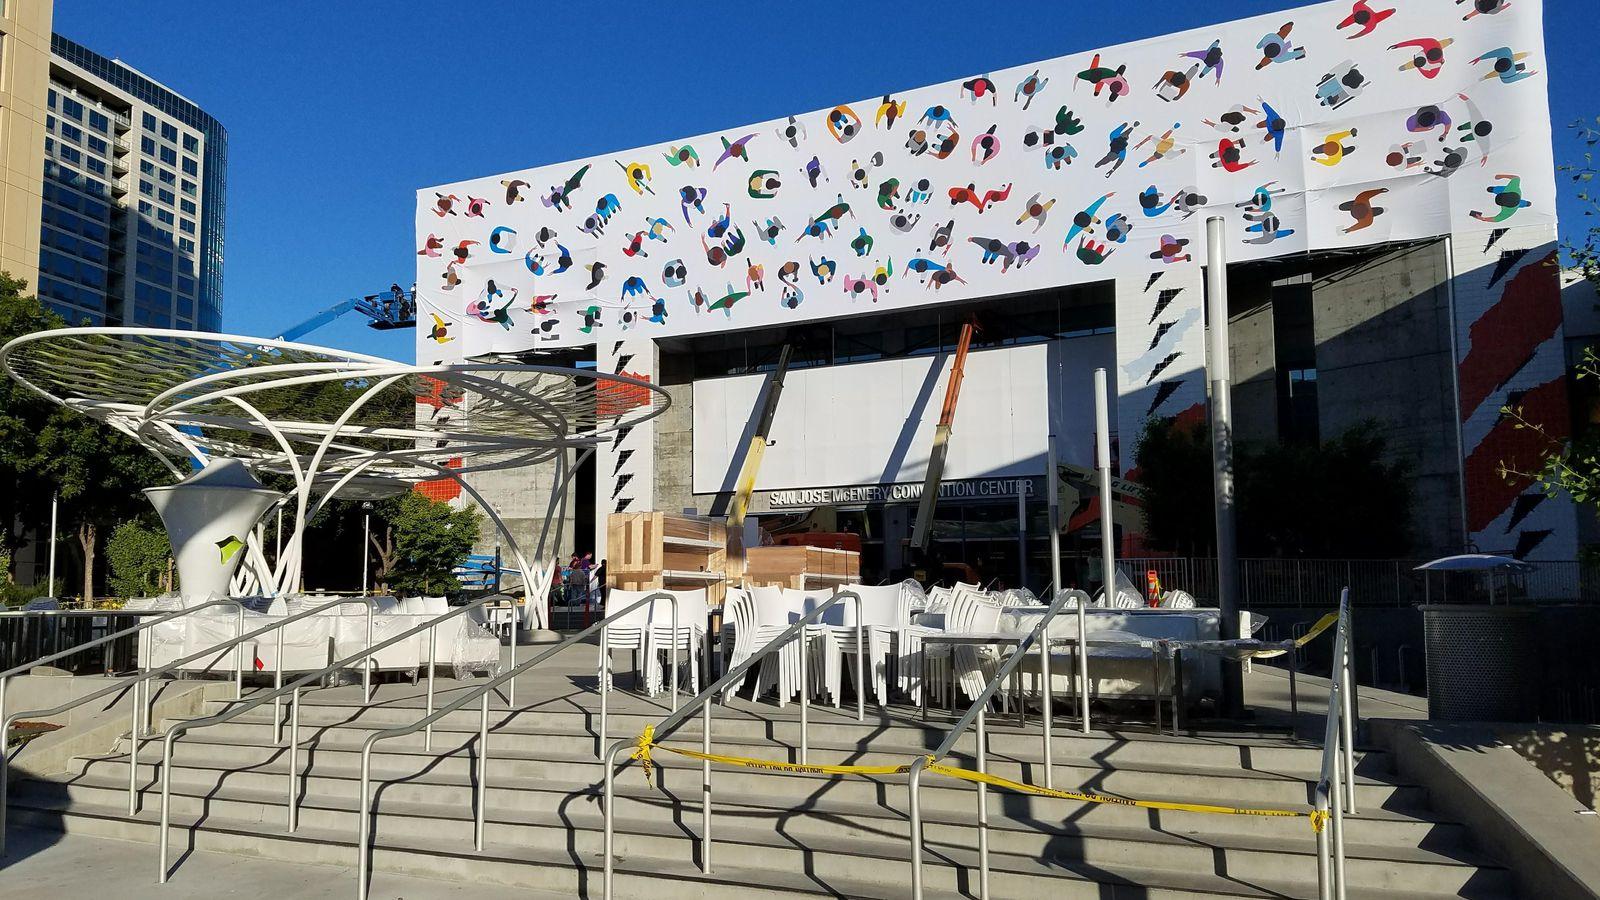 Apple WWDC 2018: 12 things to do in San Jose, CA